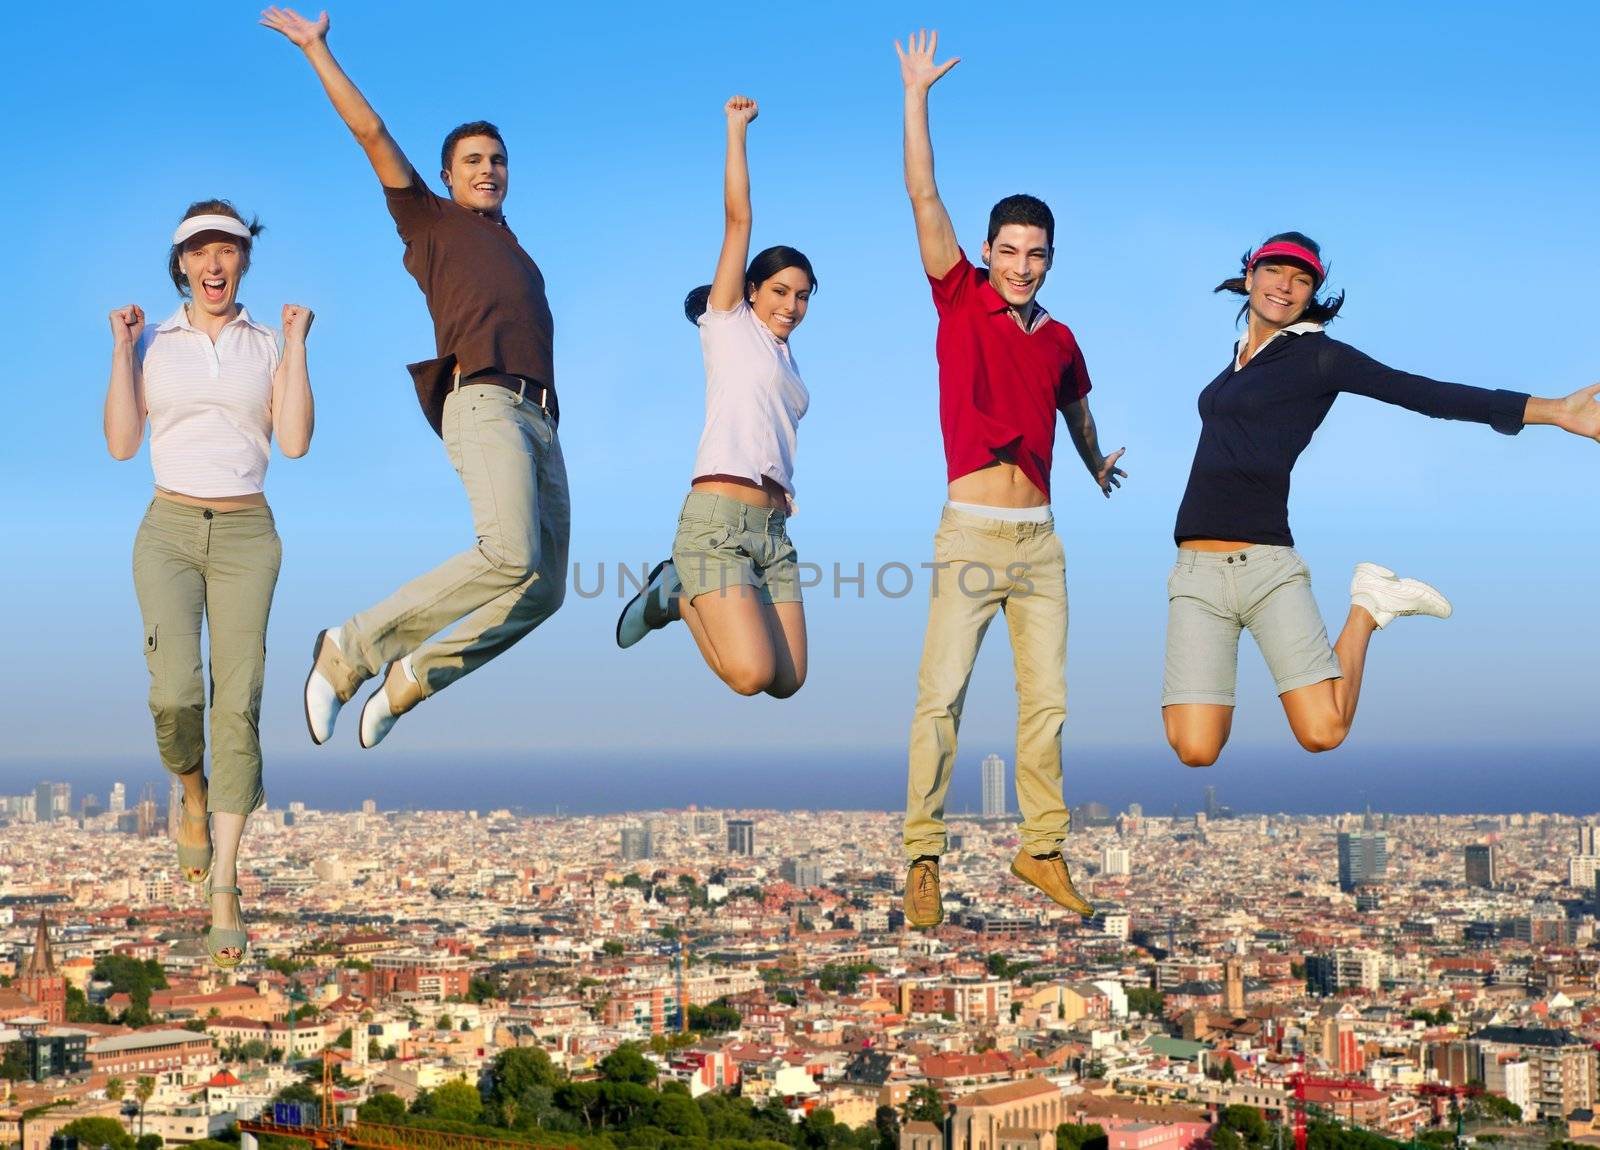 Jumping young people happy group over city buildings cityscape